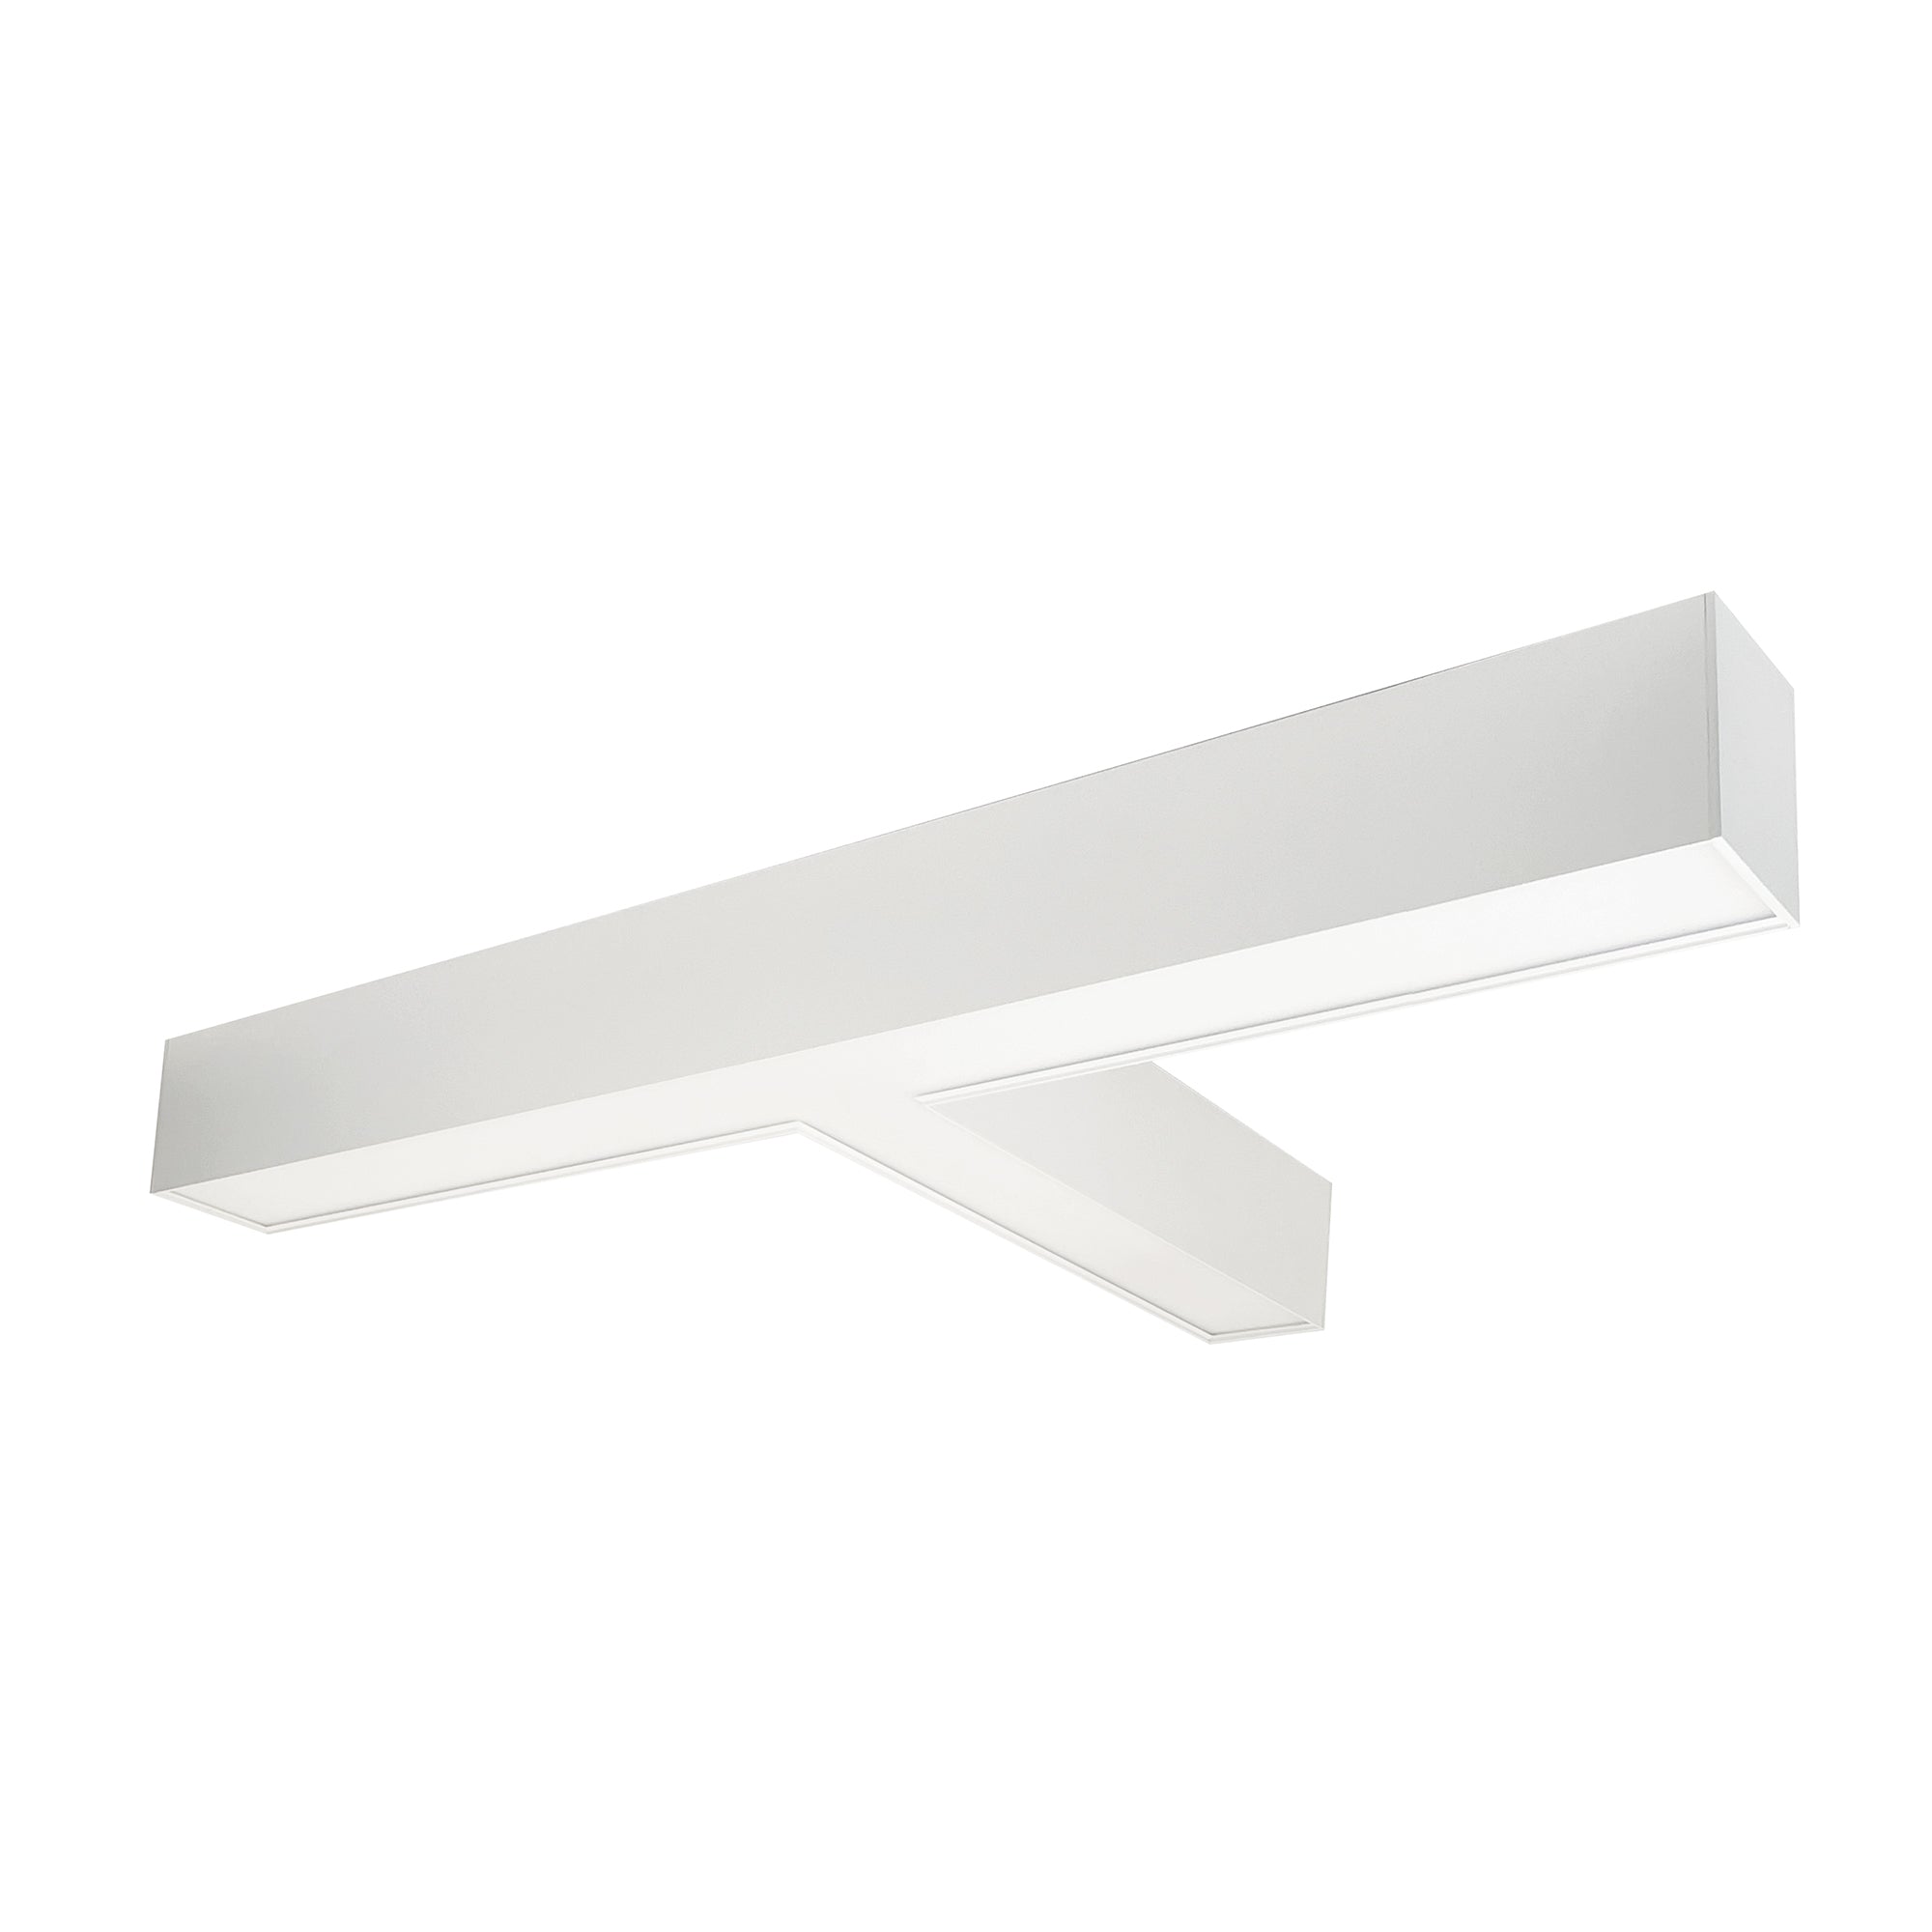 Nora Lighting NLUD-T334W - Linear -  InchT Inch Shaped L-Line LED Indirect/Direct Linear, 5027lm / Selectable CCT, White Finish